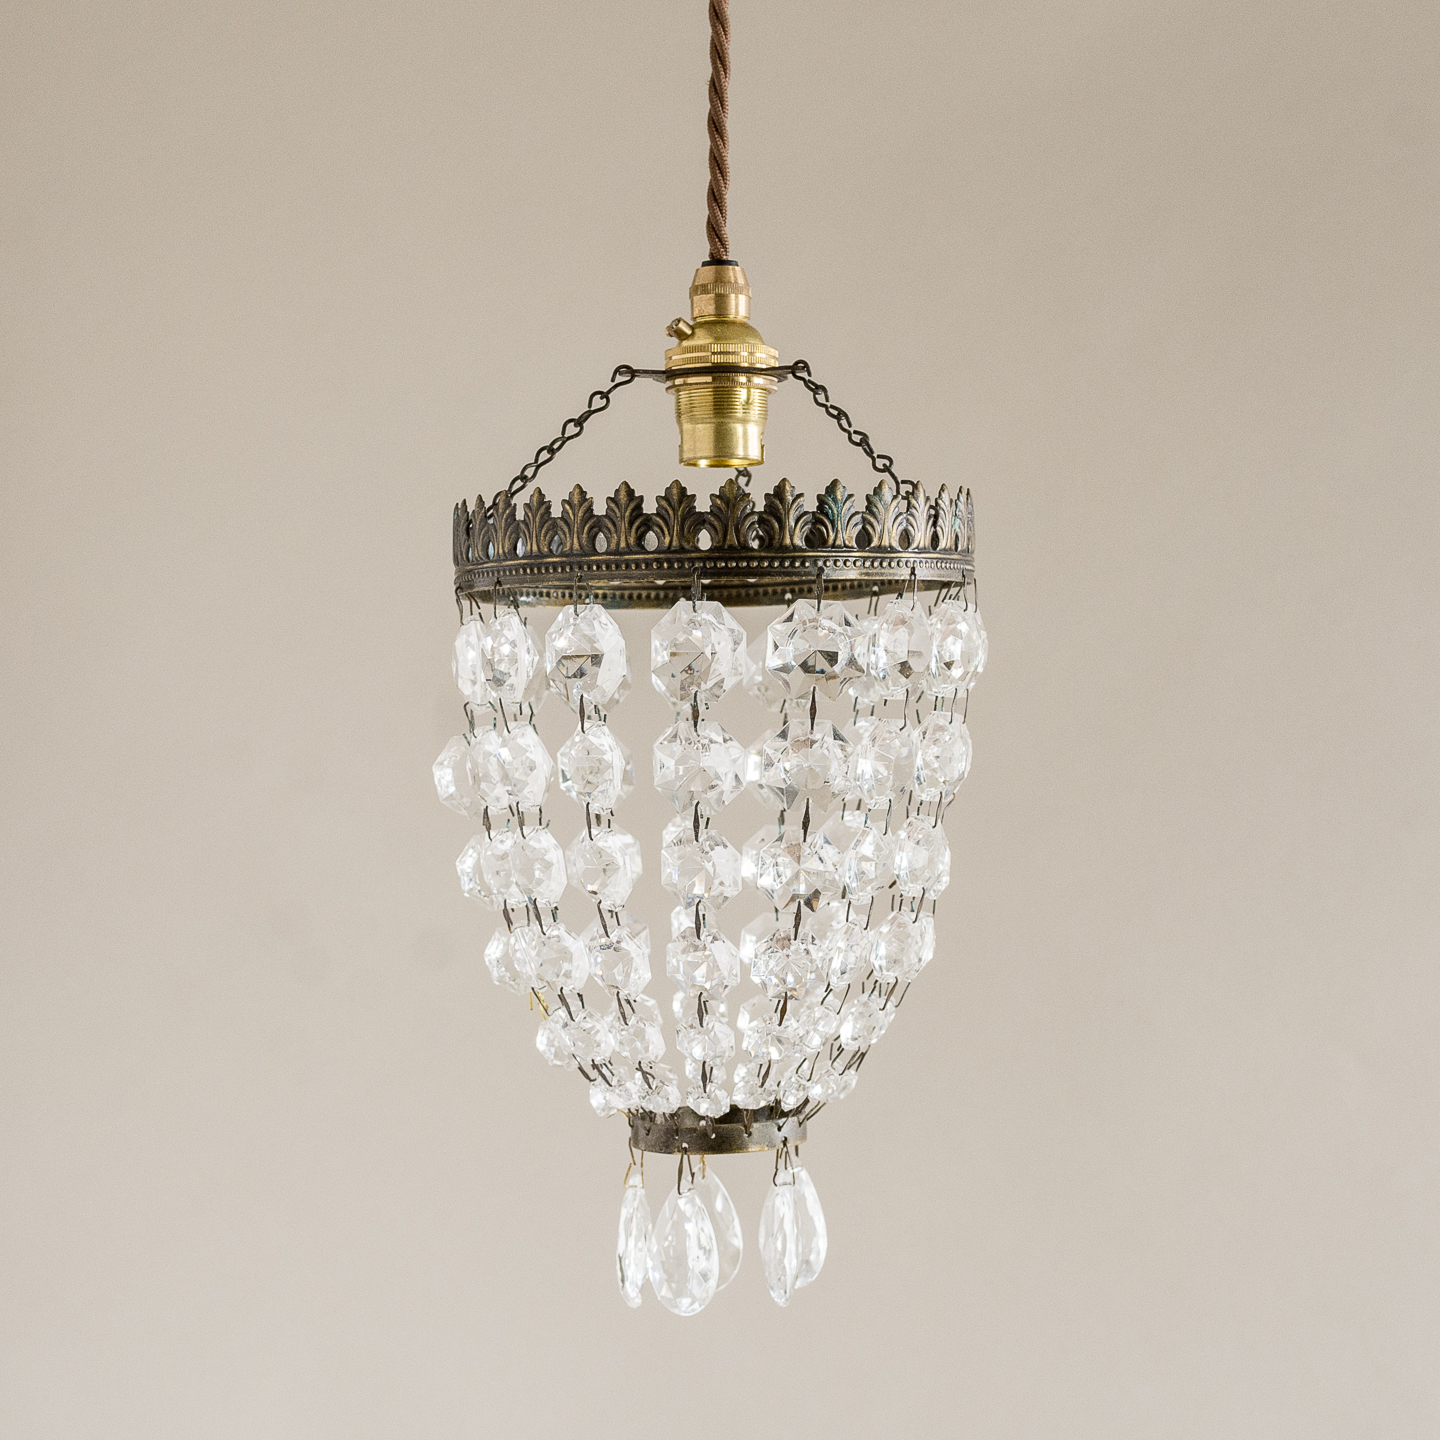 1900s French Crystal Bag Chandelier | Chairish